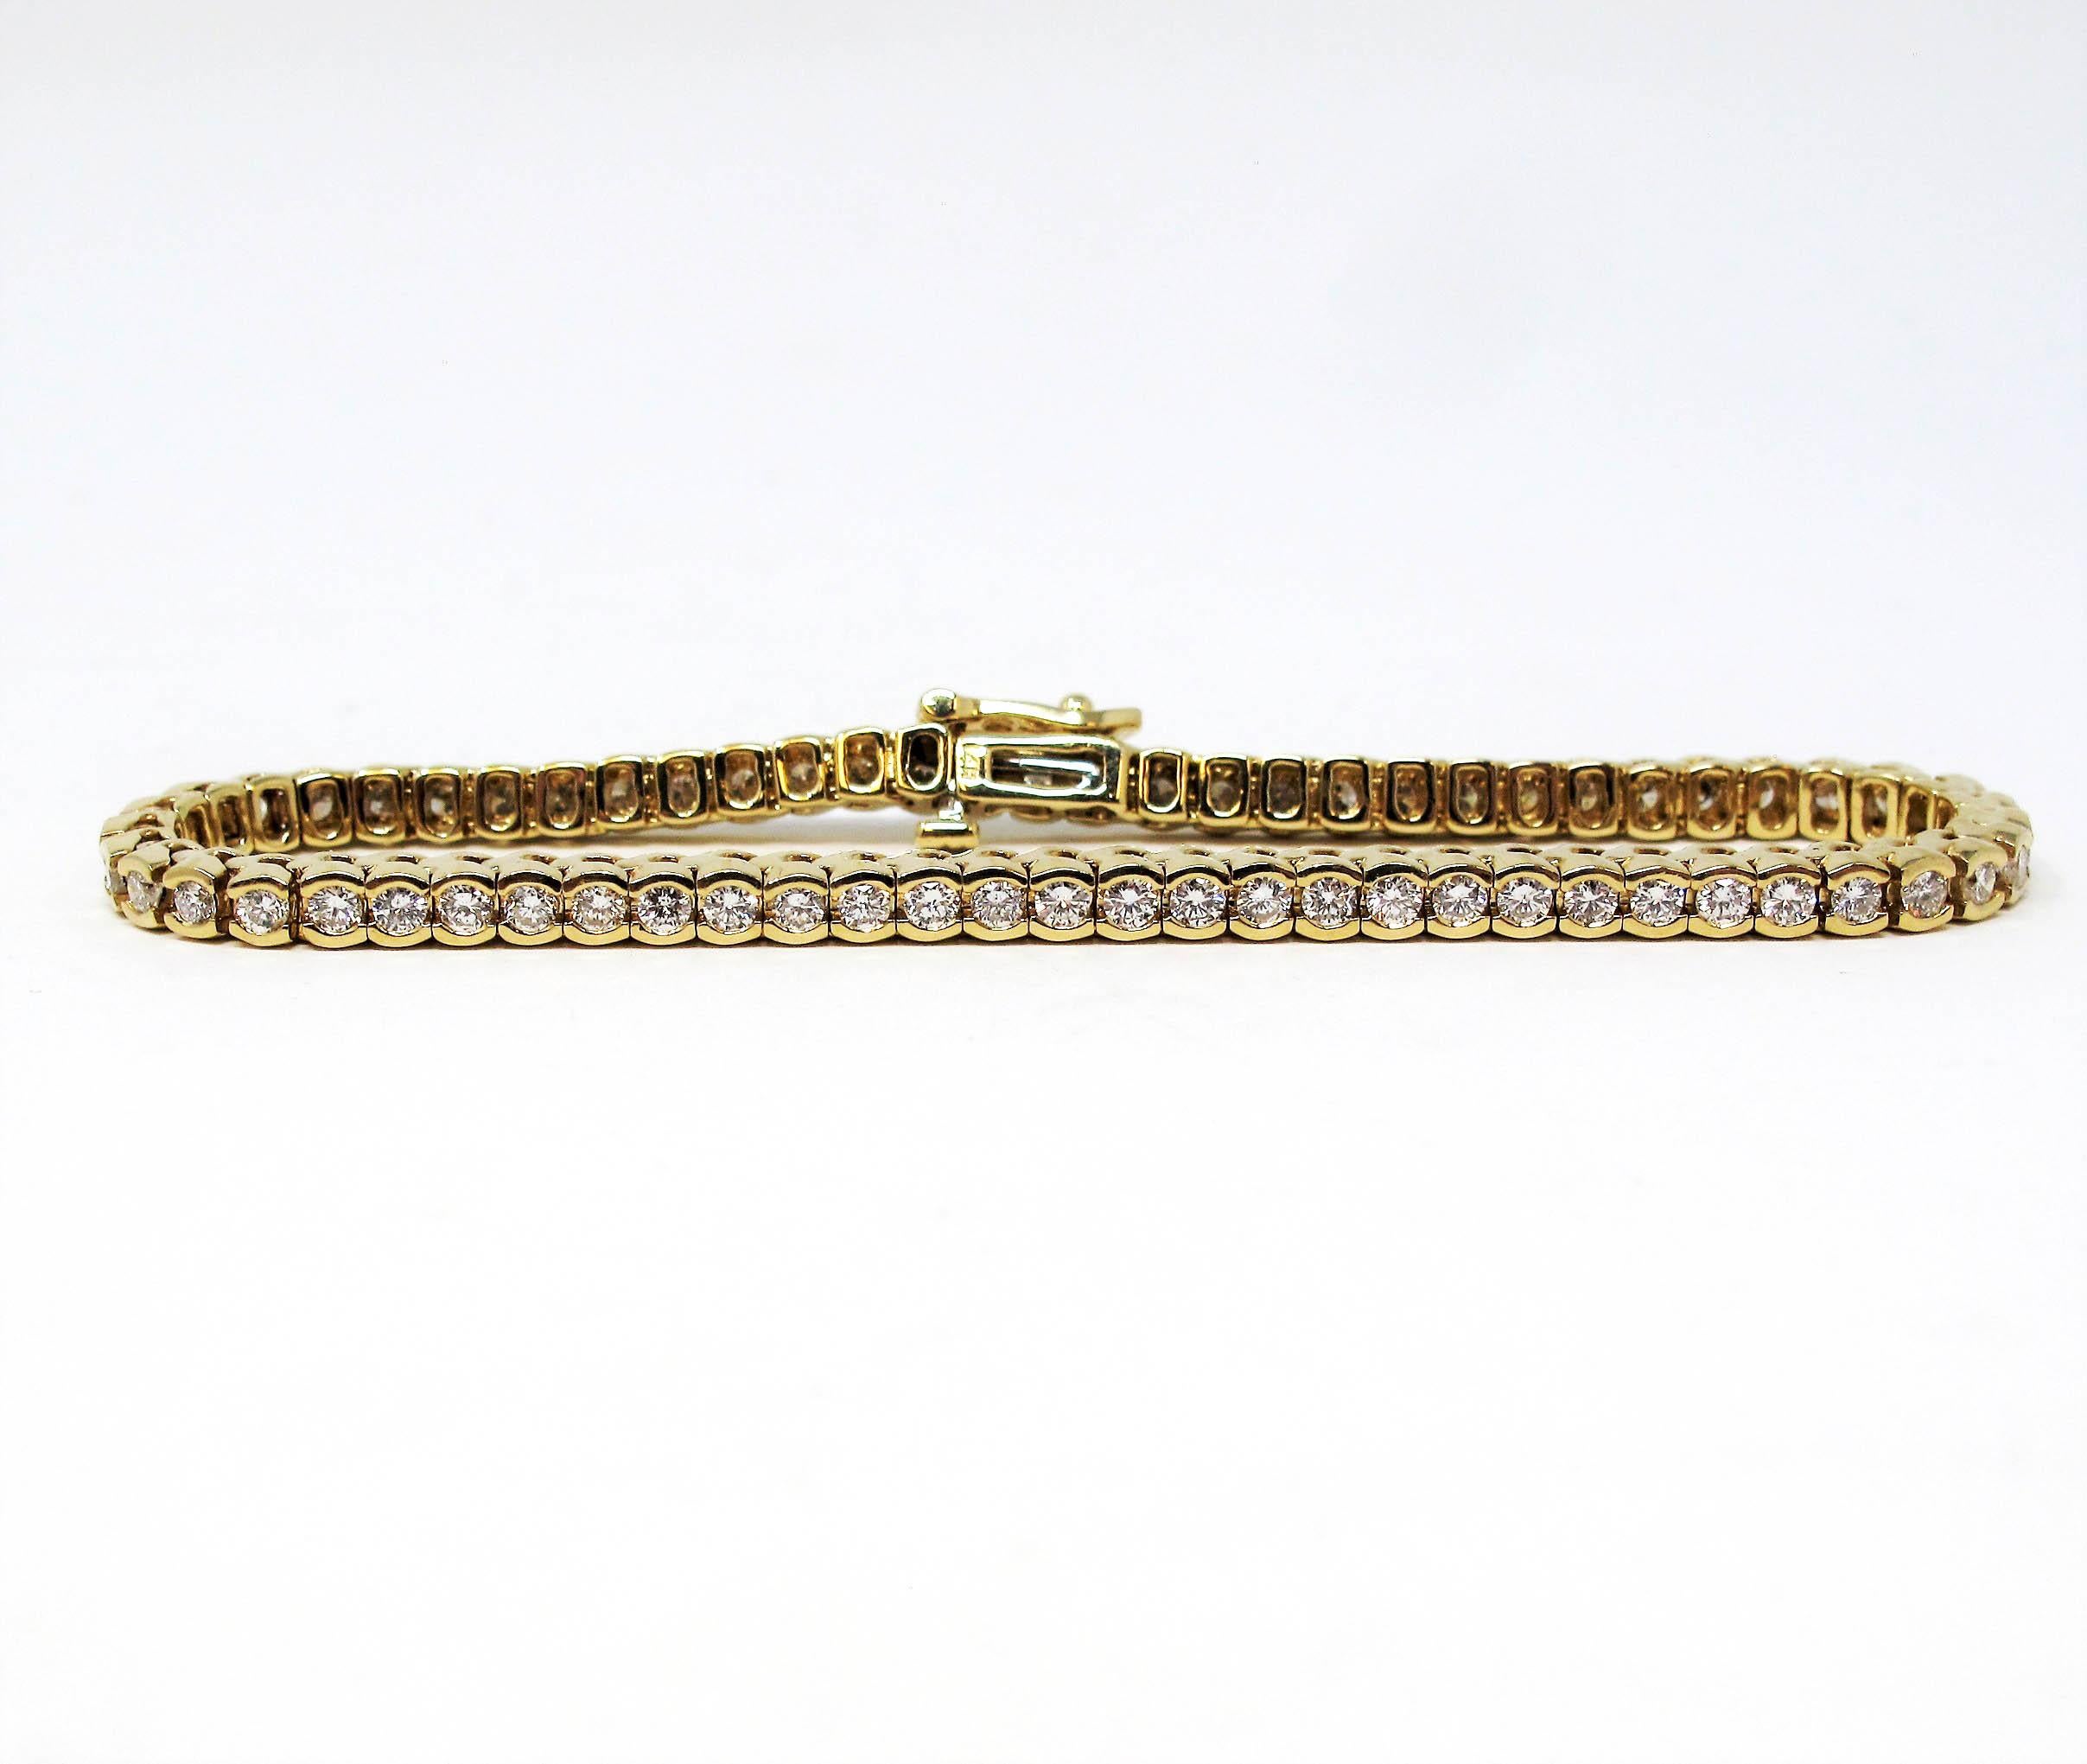 3.50 Carats Total Round Diamond Tennis Line Bracelet in 14 Karat Yellow Gold In Good Condition For Sale In Scottsdale, AZ